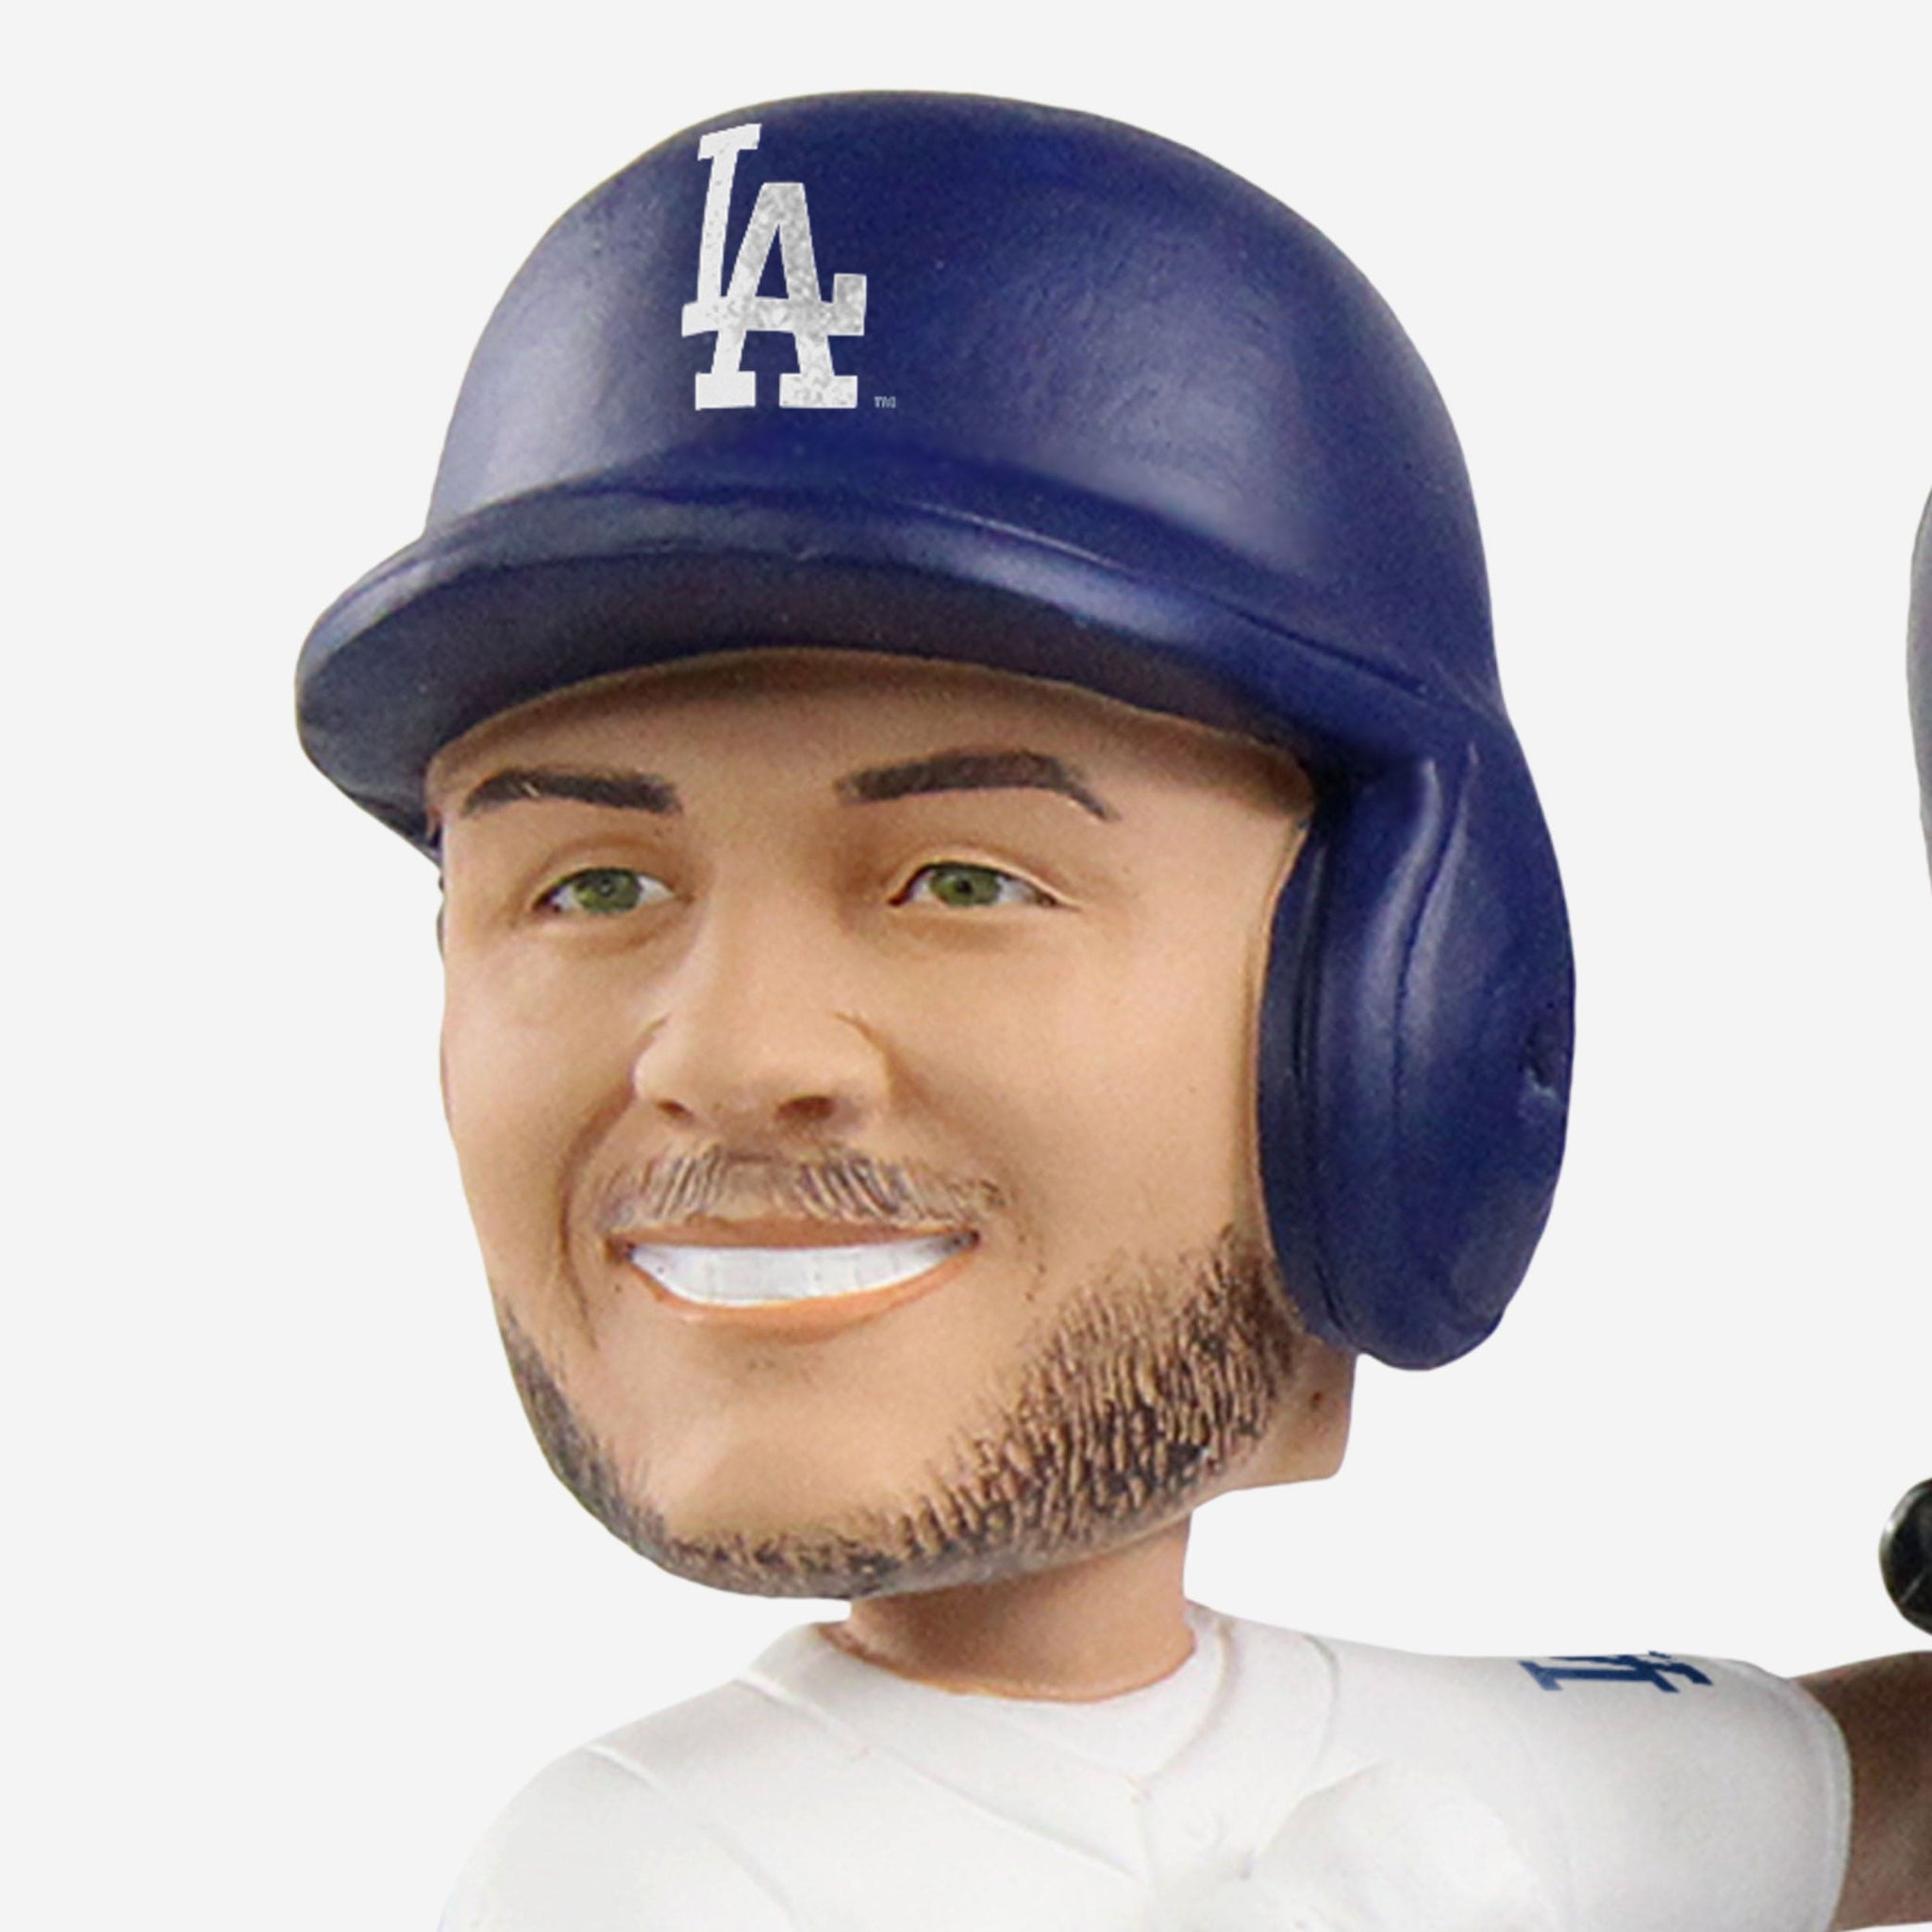 FOCO Selling Dodgers Bobbleheads Of Mookie Betts In 'Bighead' Form